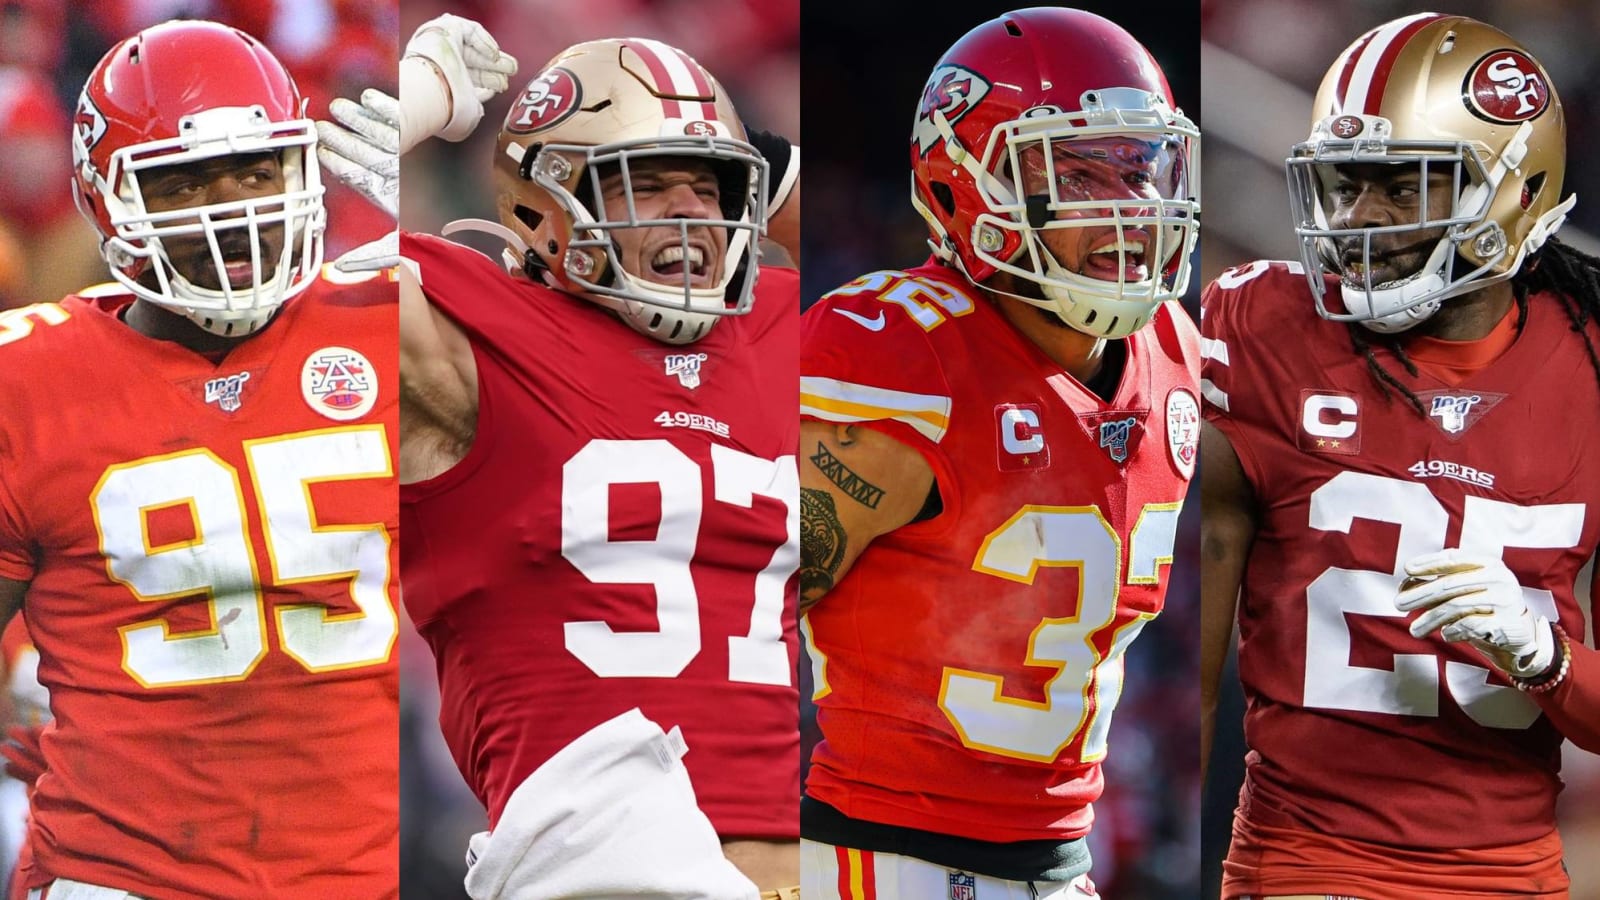 Advantage, 49ers: Top 10 defensive players in Super Bowl